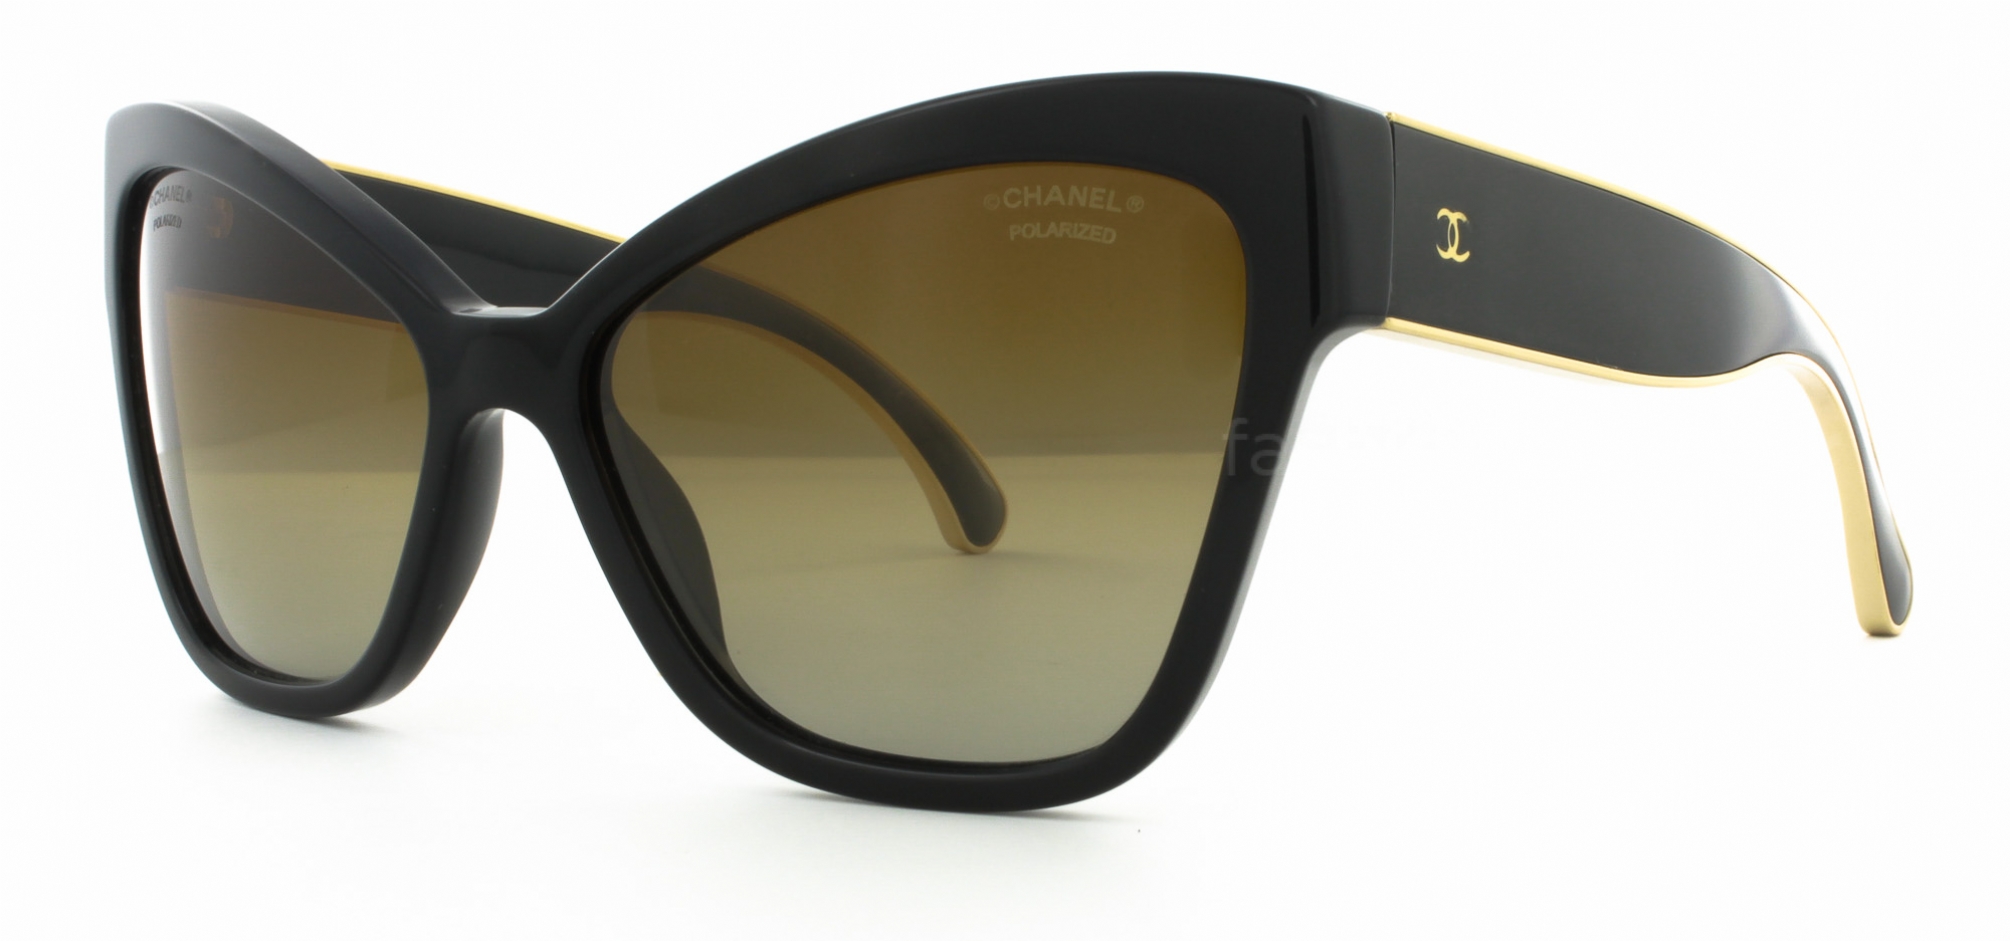 CHANEL 5271 622S9